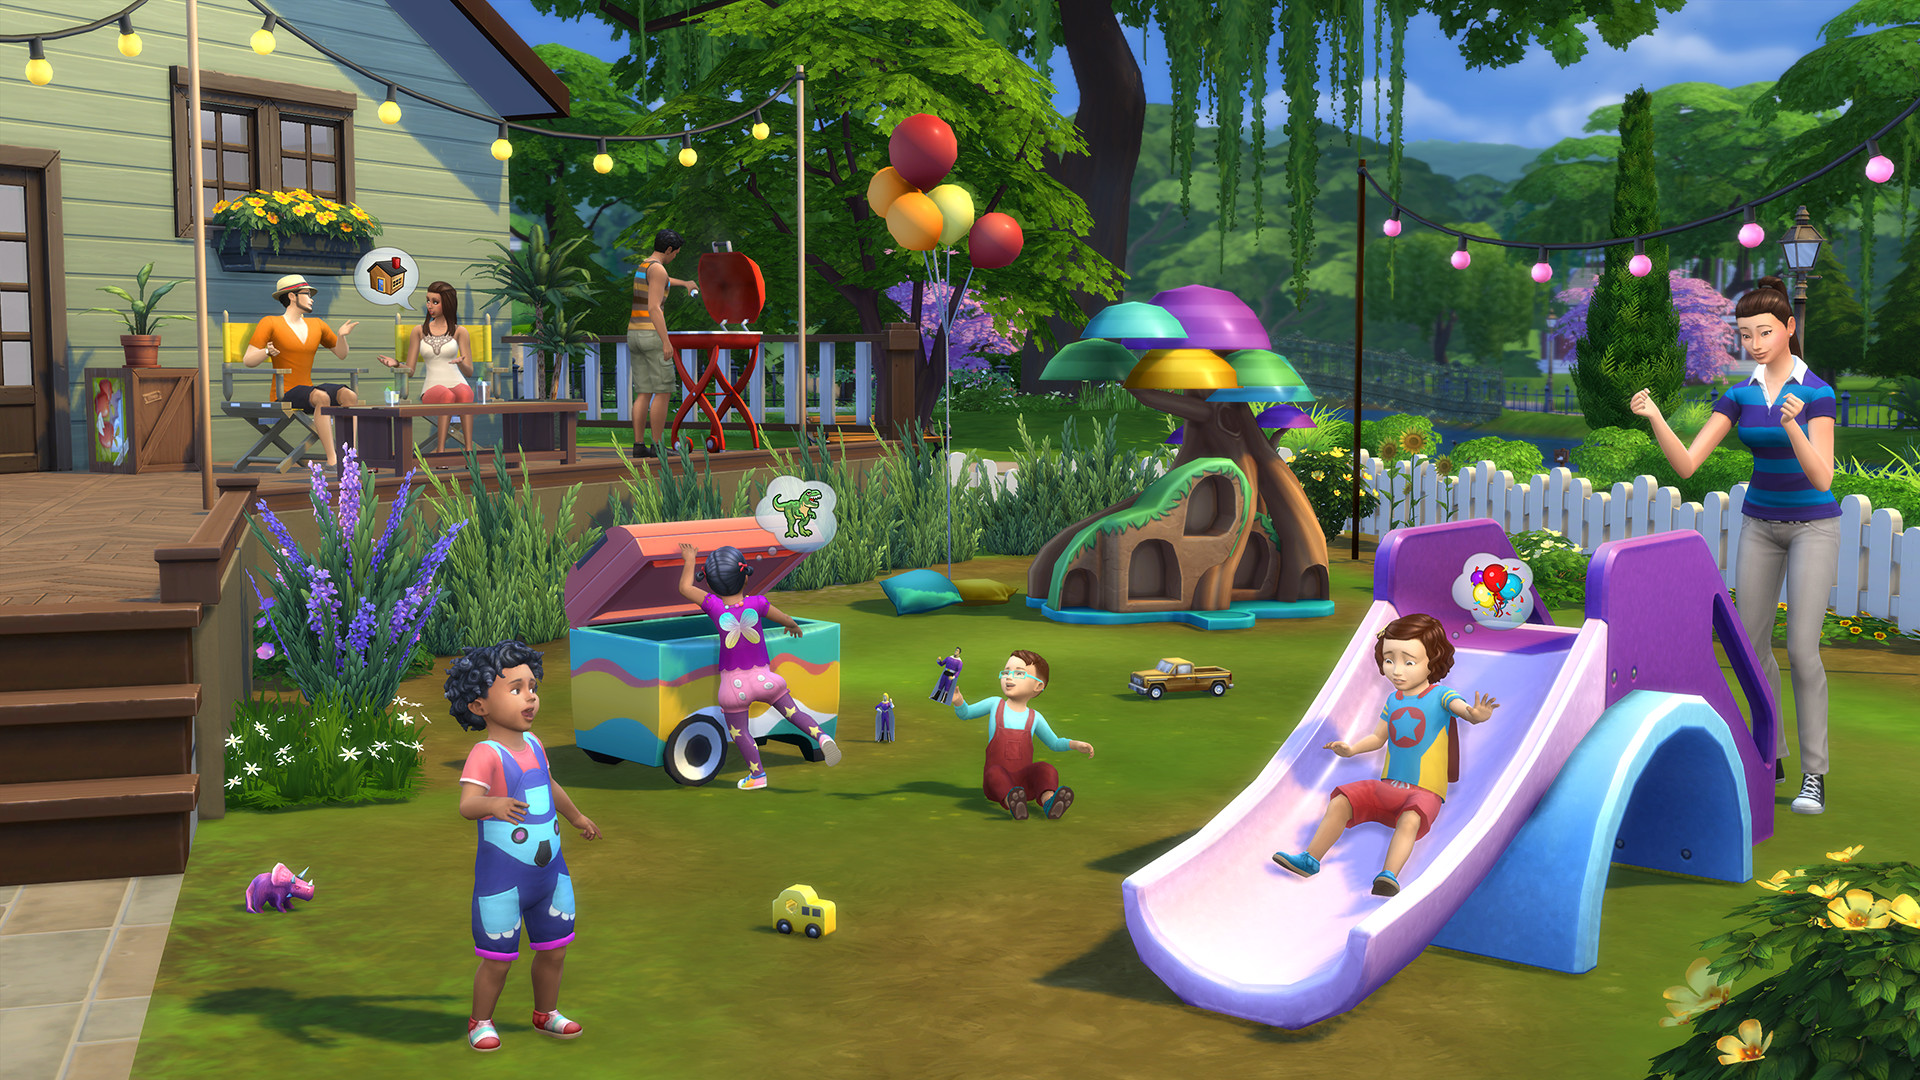 The Sims 4 Toddler Stuff: New Gameplay Trailer